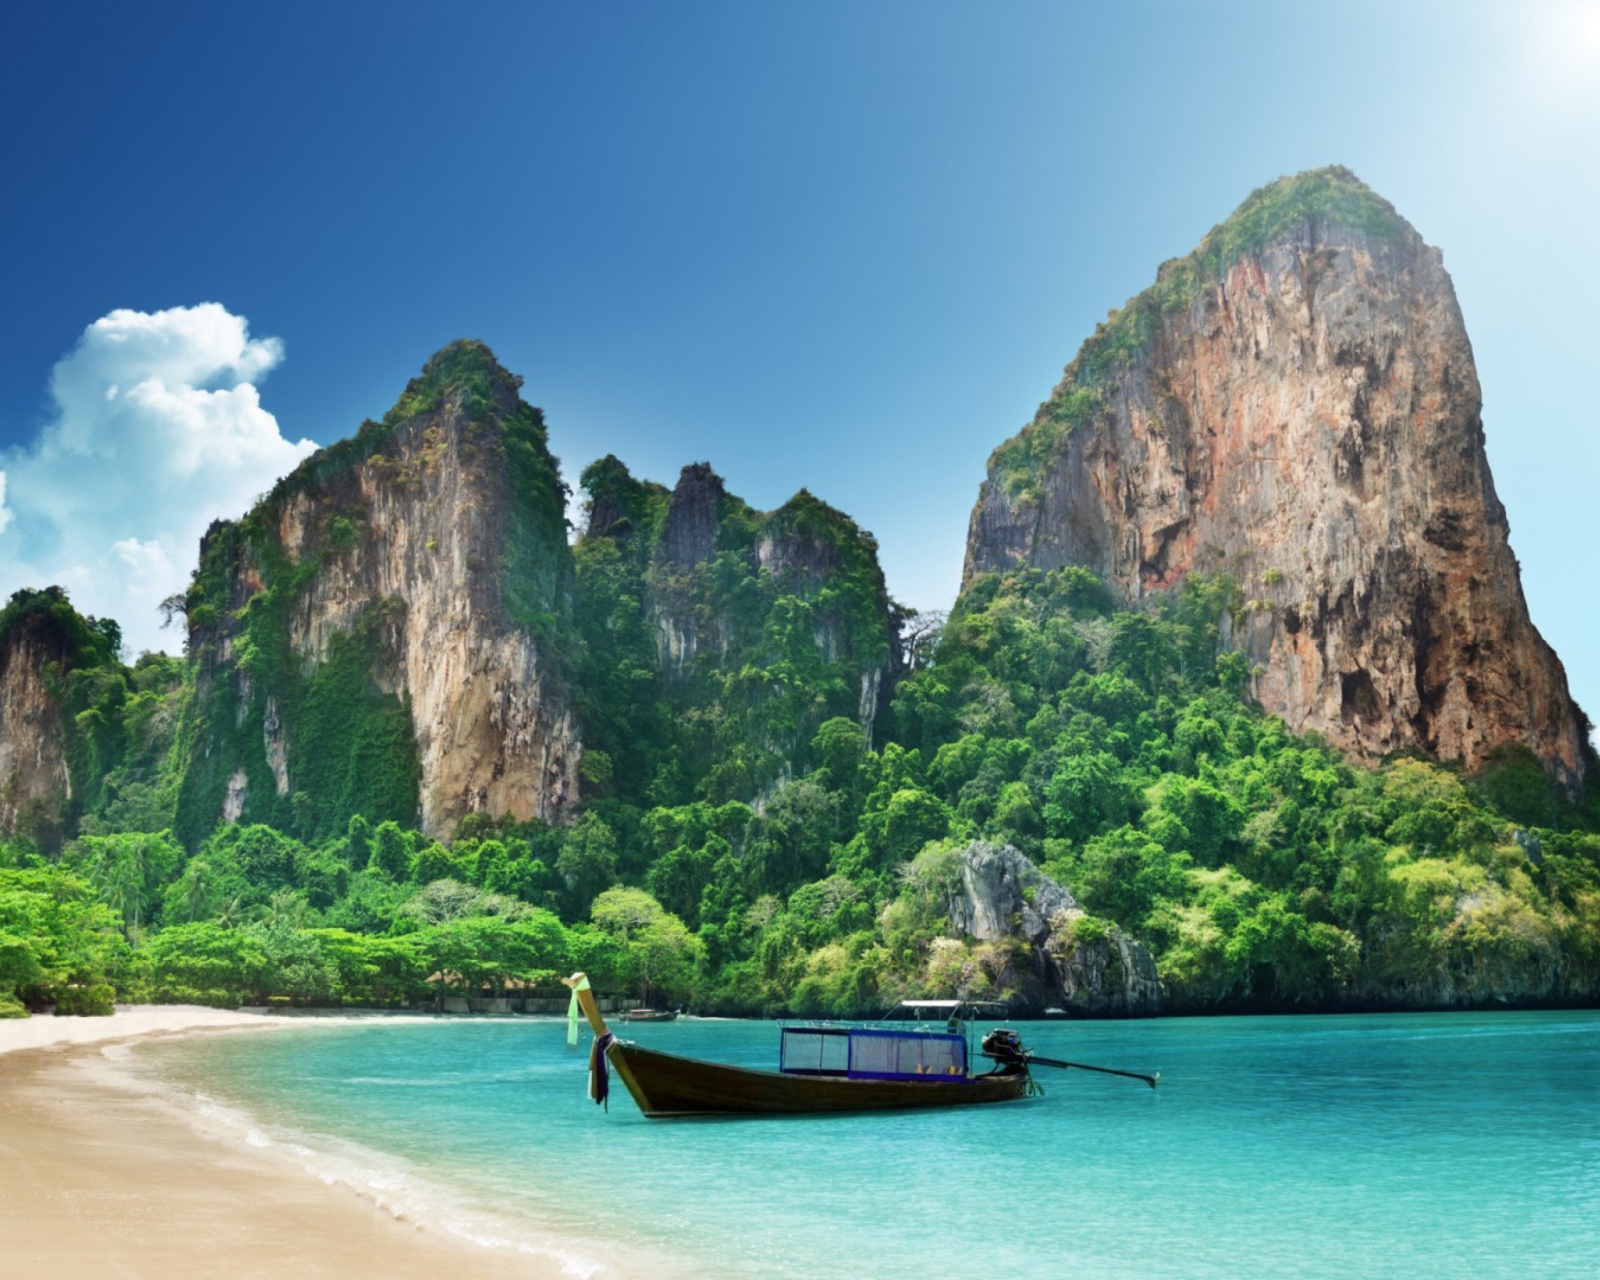 Das Boat And Rocks In Thailand Wallpaper 1600x1280